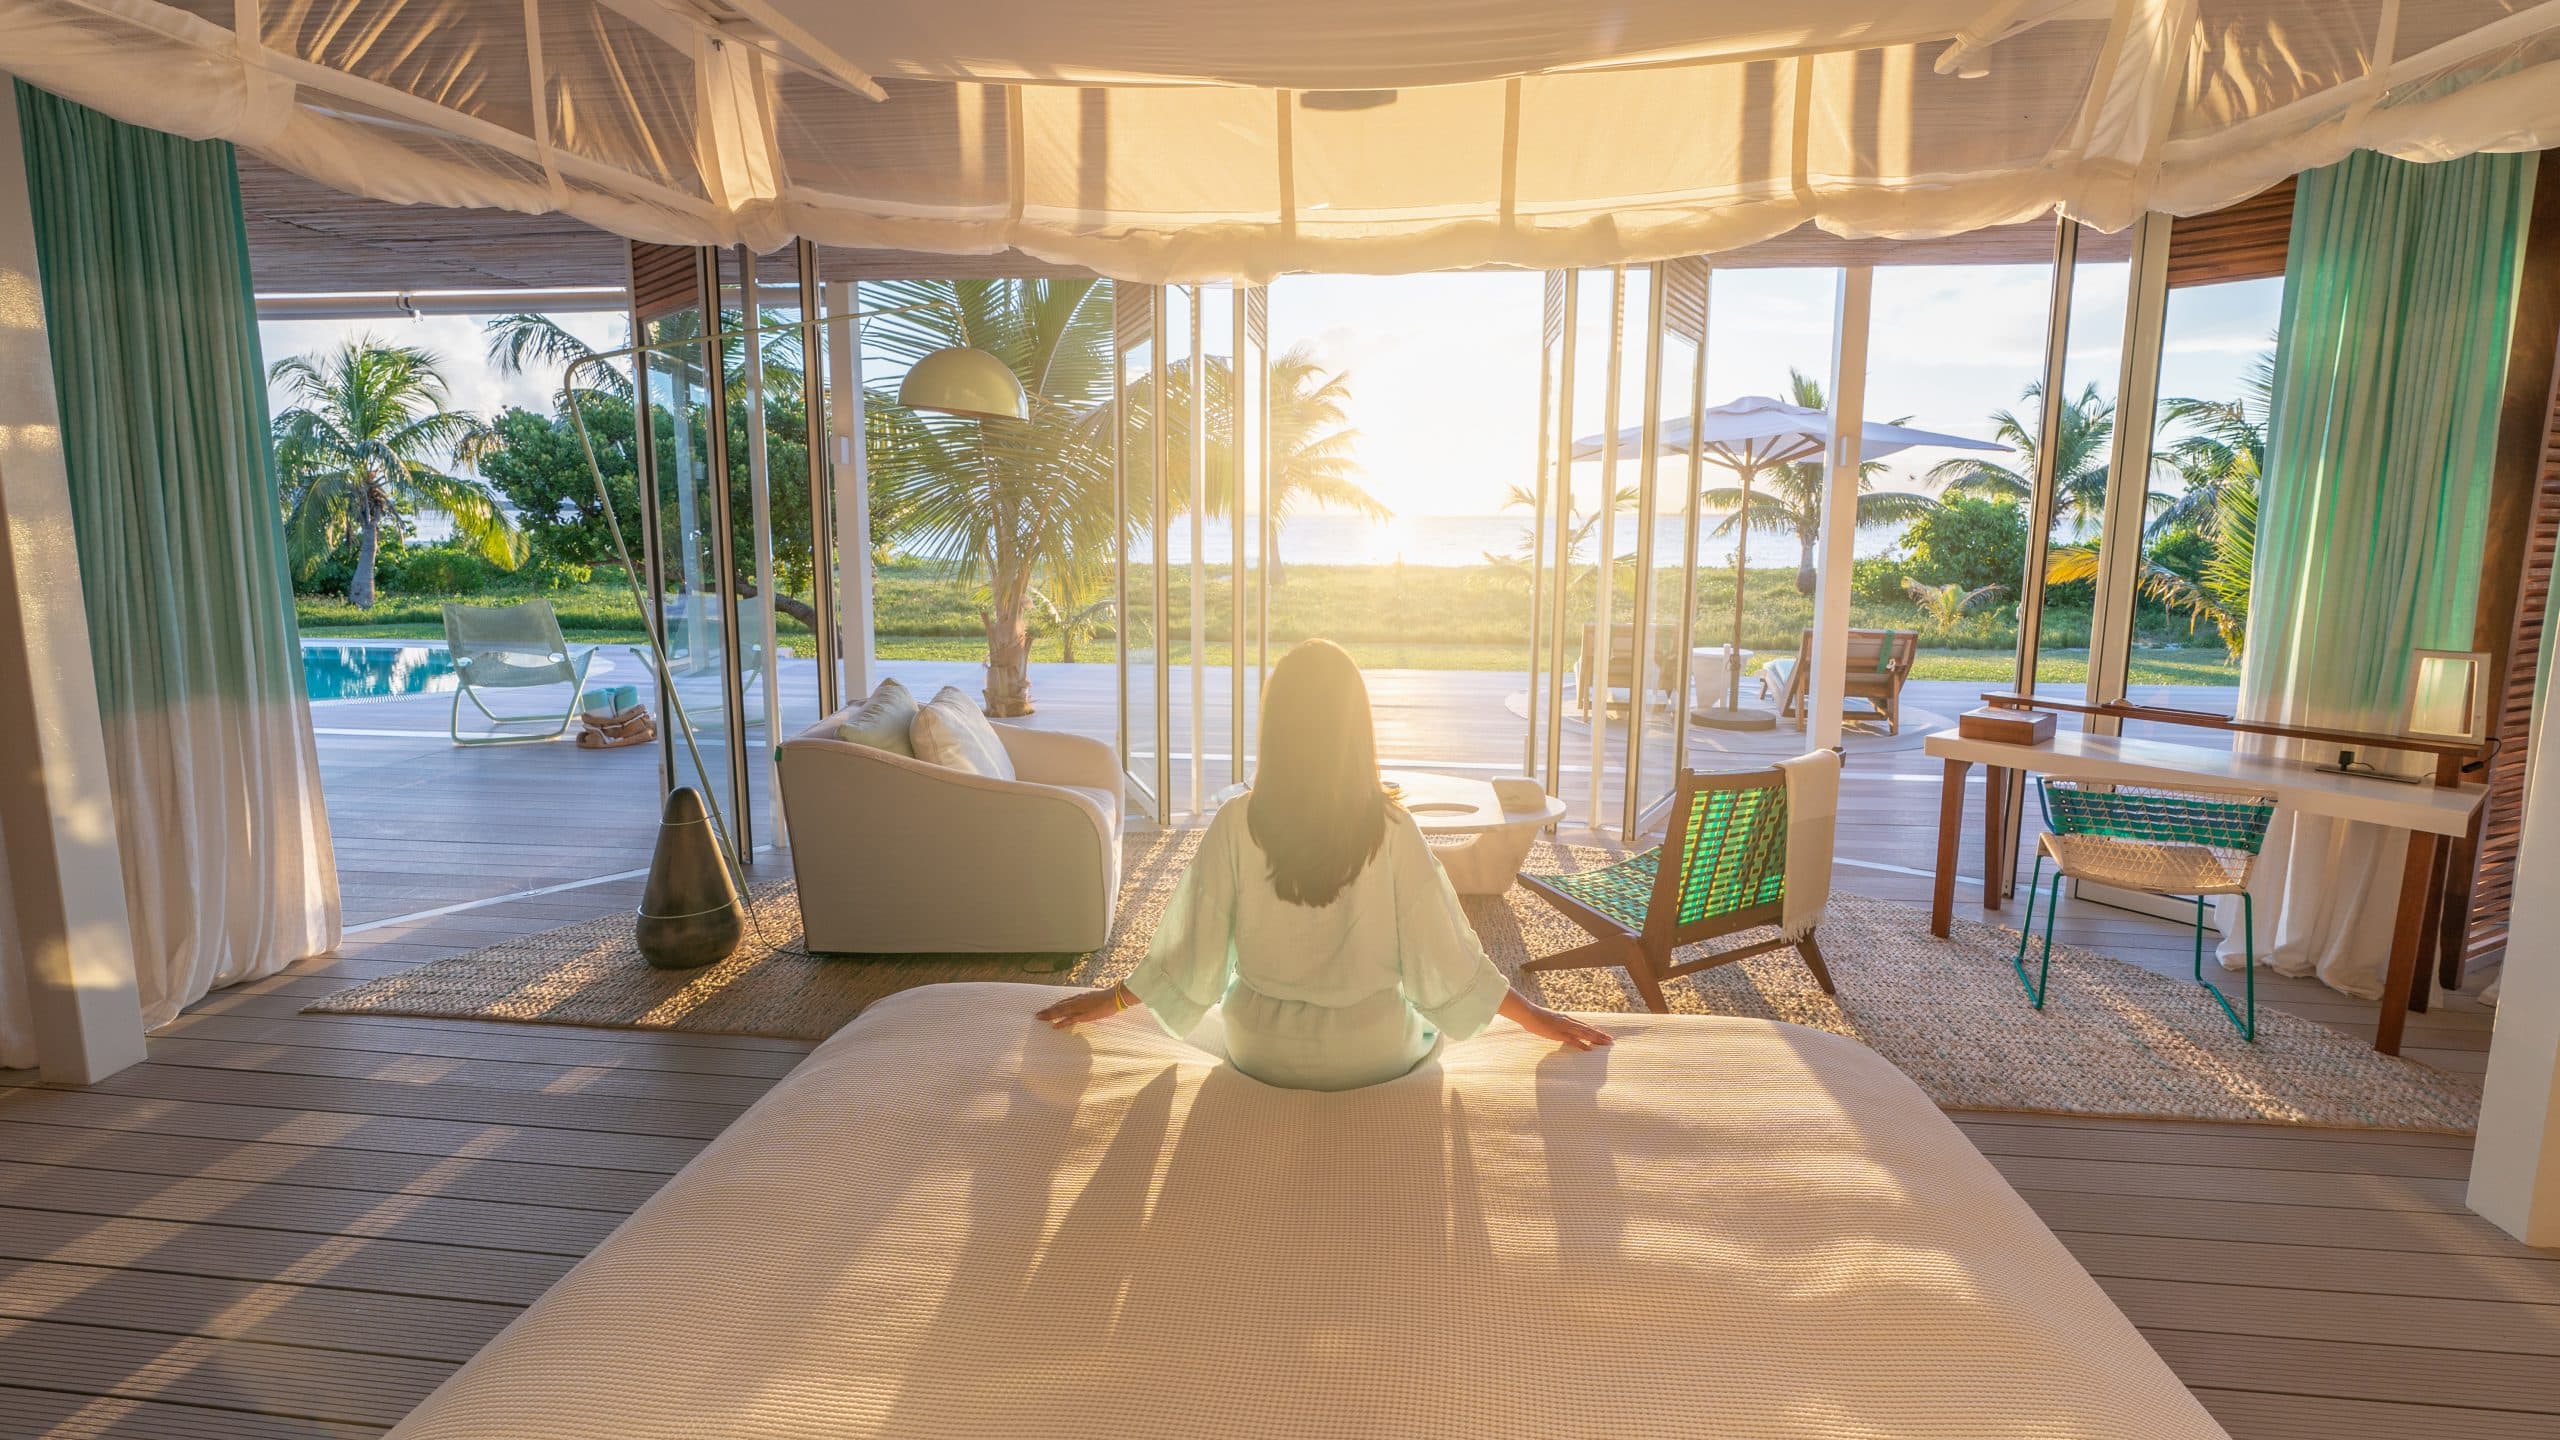 Come touch the earth - waking up to the ocean at Miavana 